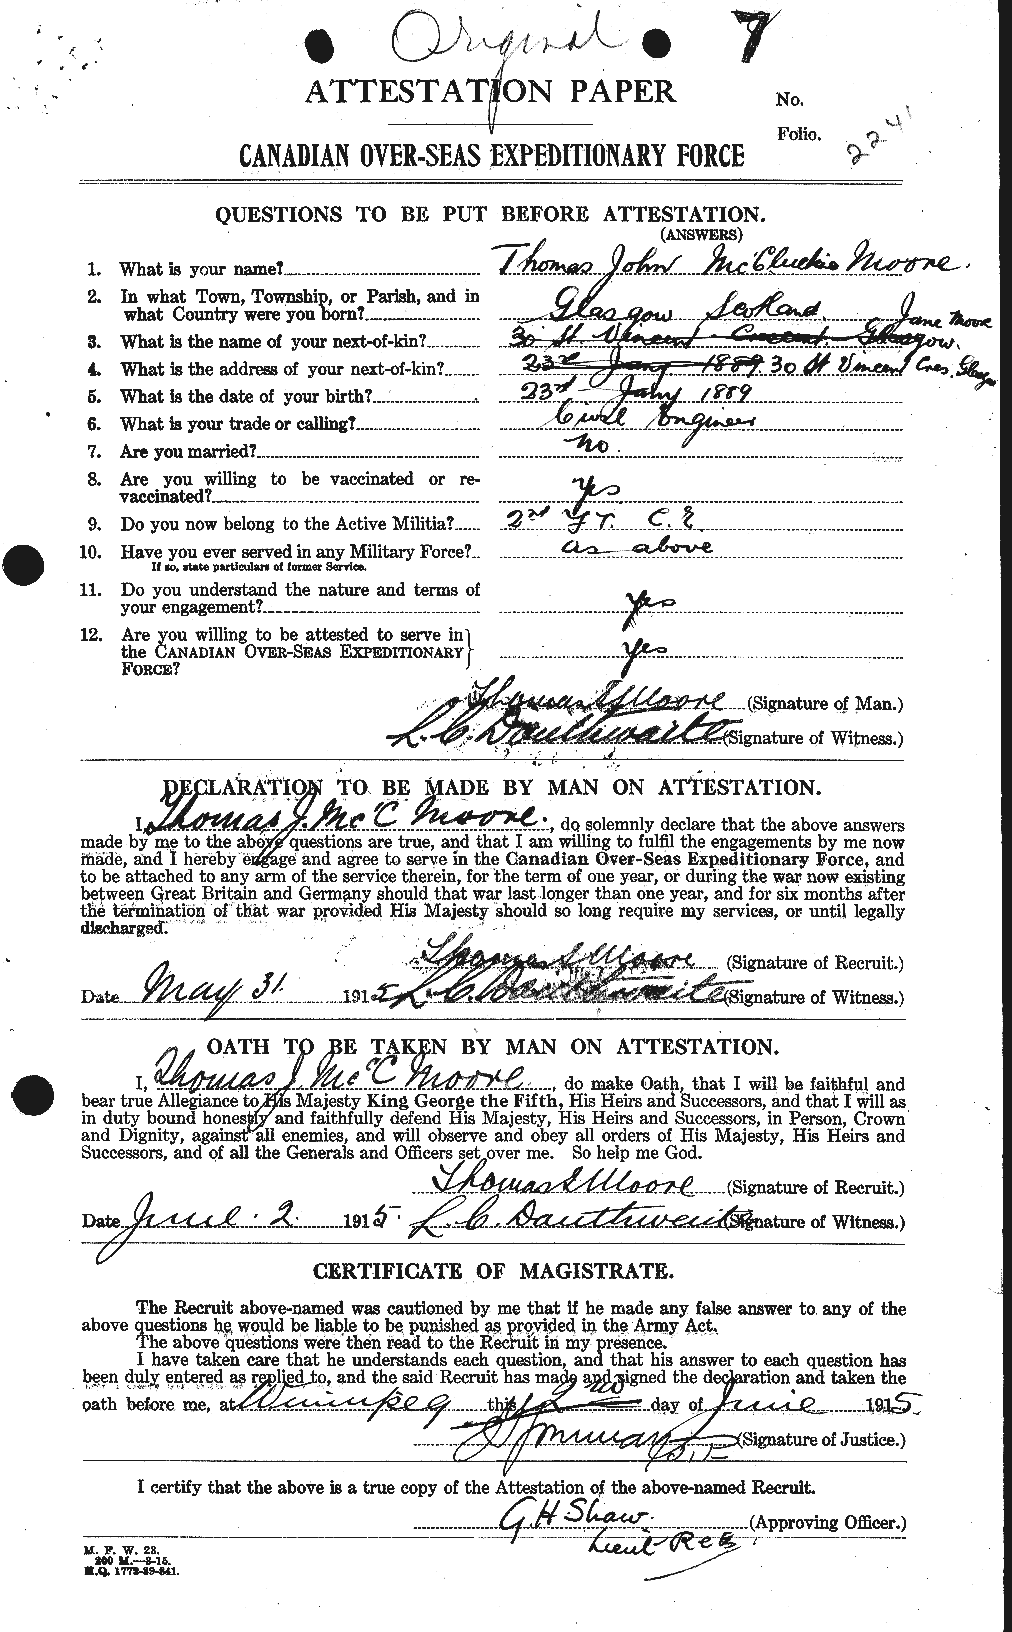 Personnel Records of the First World War - CEF 505660a